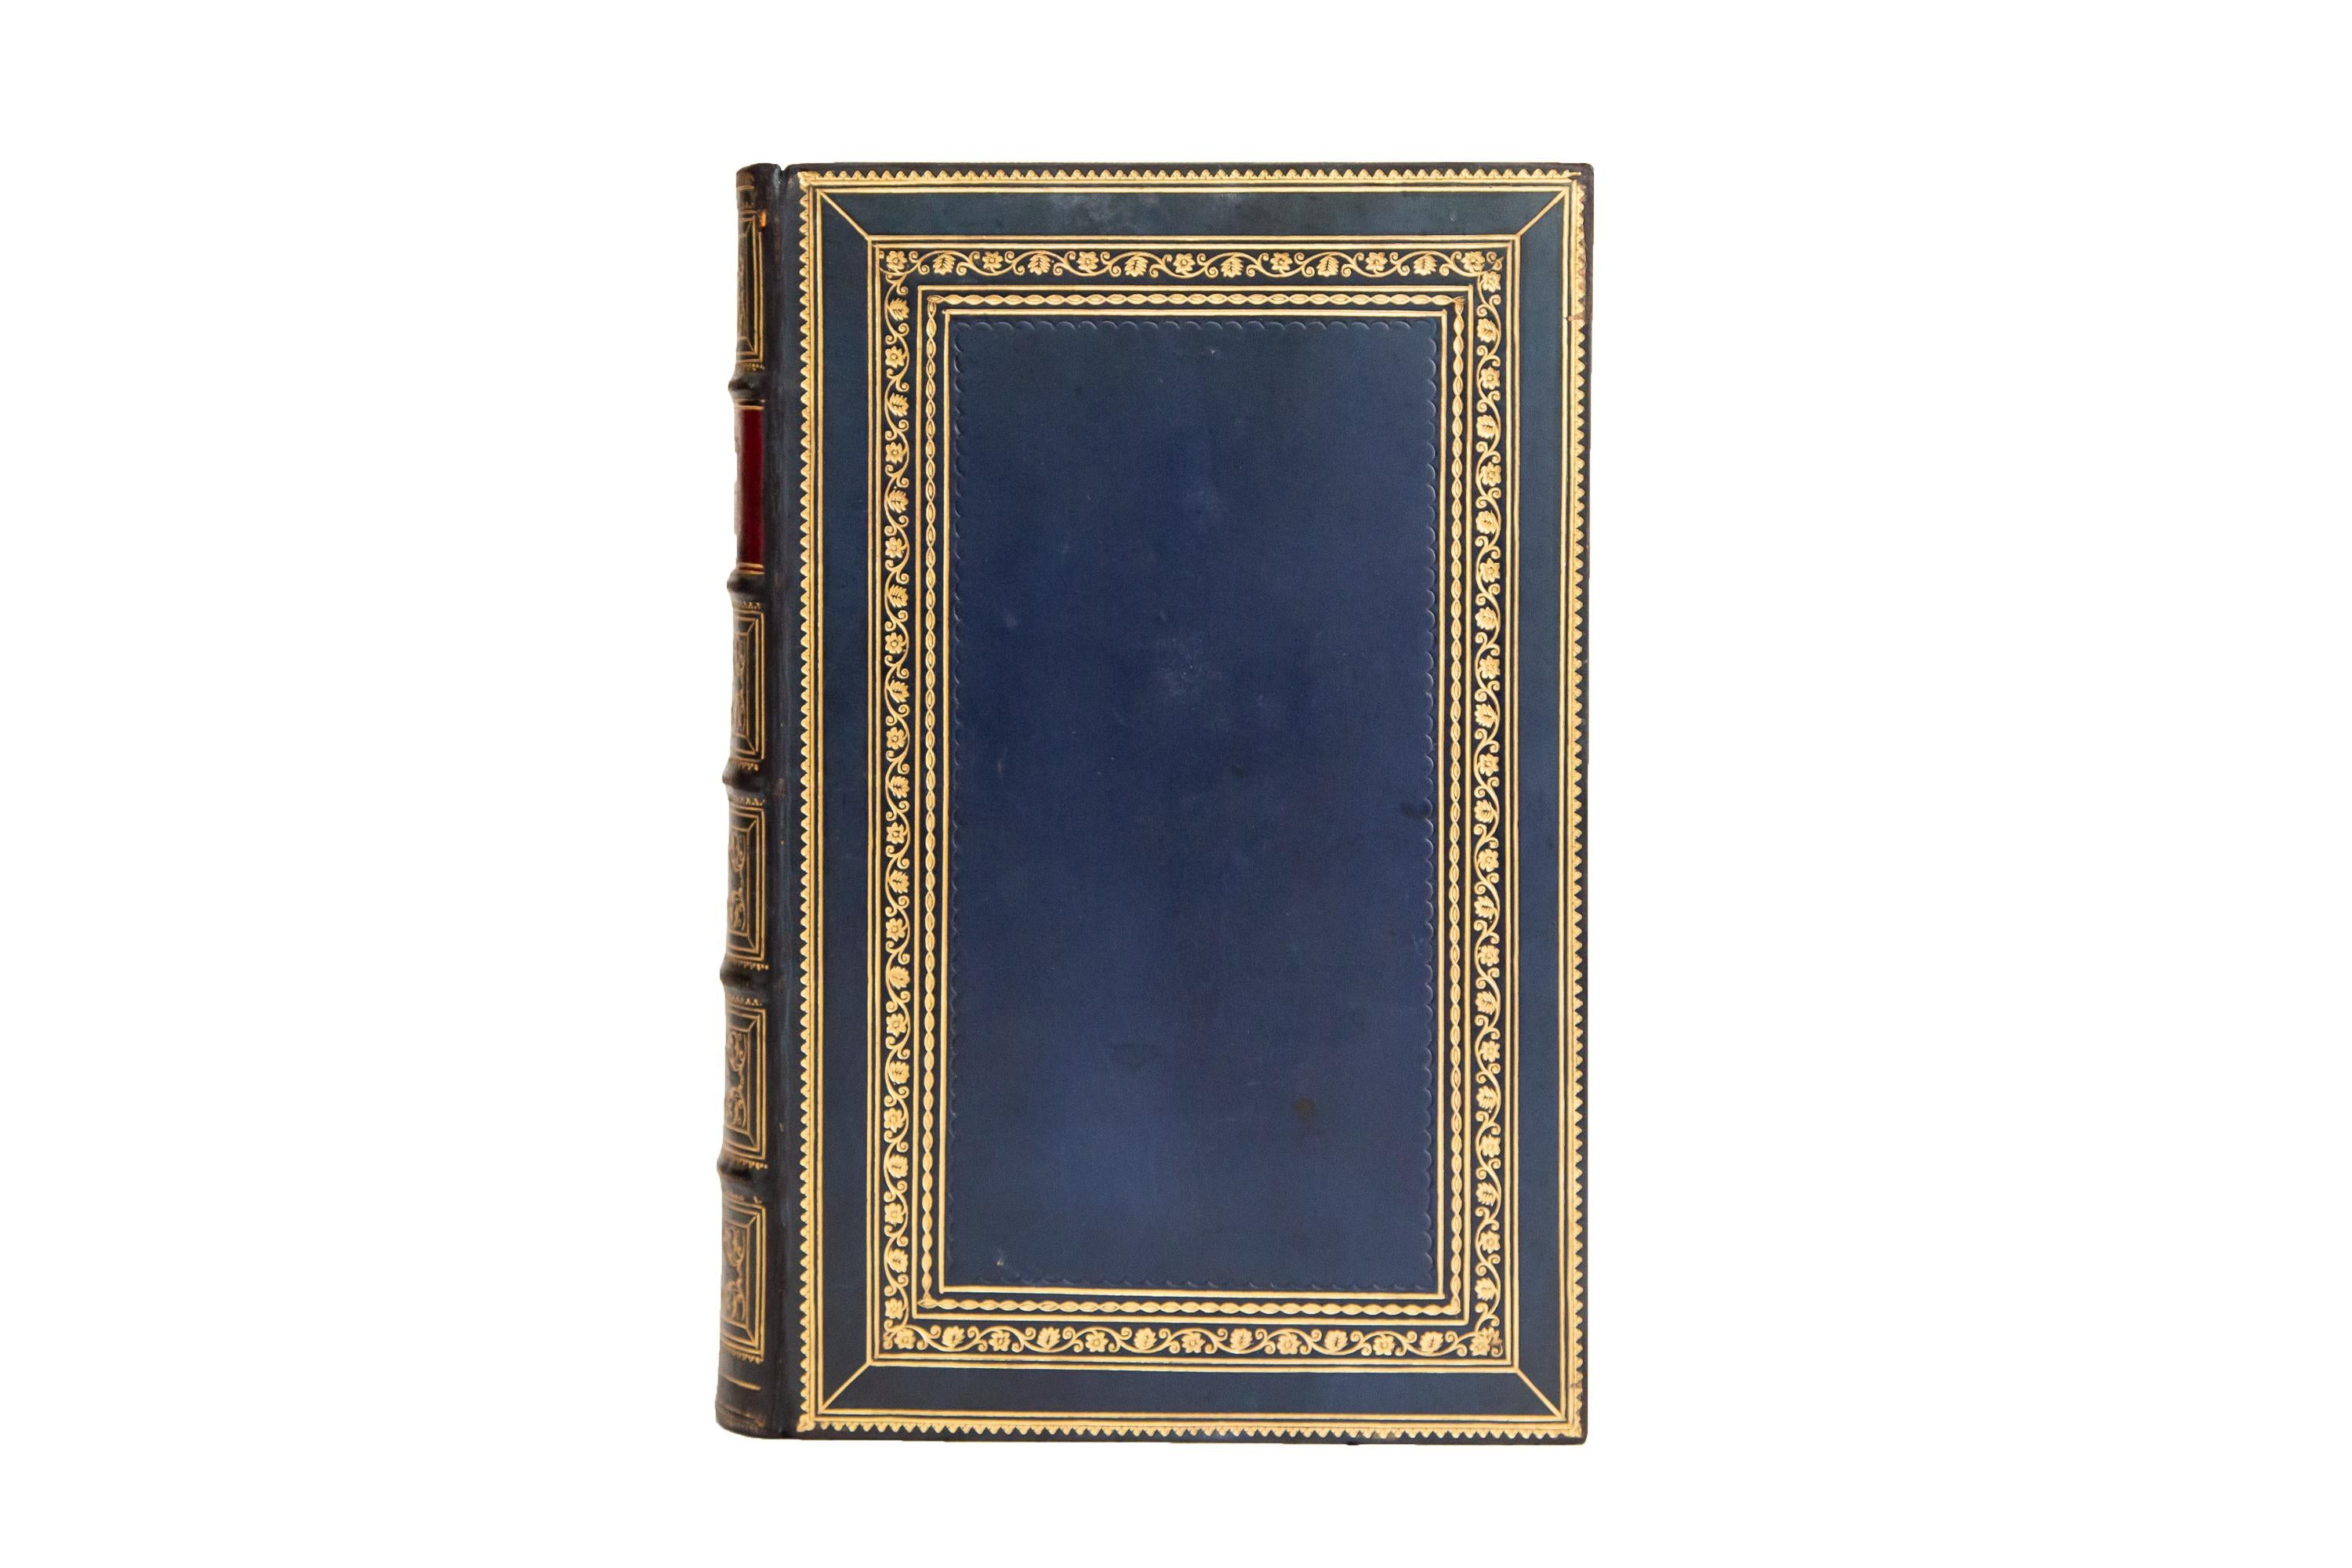 1 Volume. William Wordsworth, Poetical Works. Bound in full blue calf with covers displaying ornate, floral, gilt-tooled bordering. Raised bands, dotted in gilt tooling with panels displaying ornate gilt tooling and labels in red morocco with